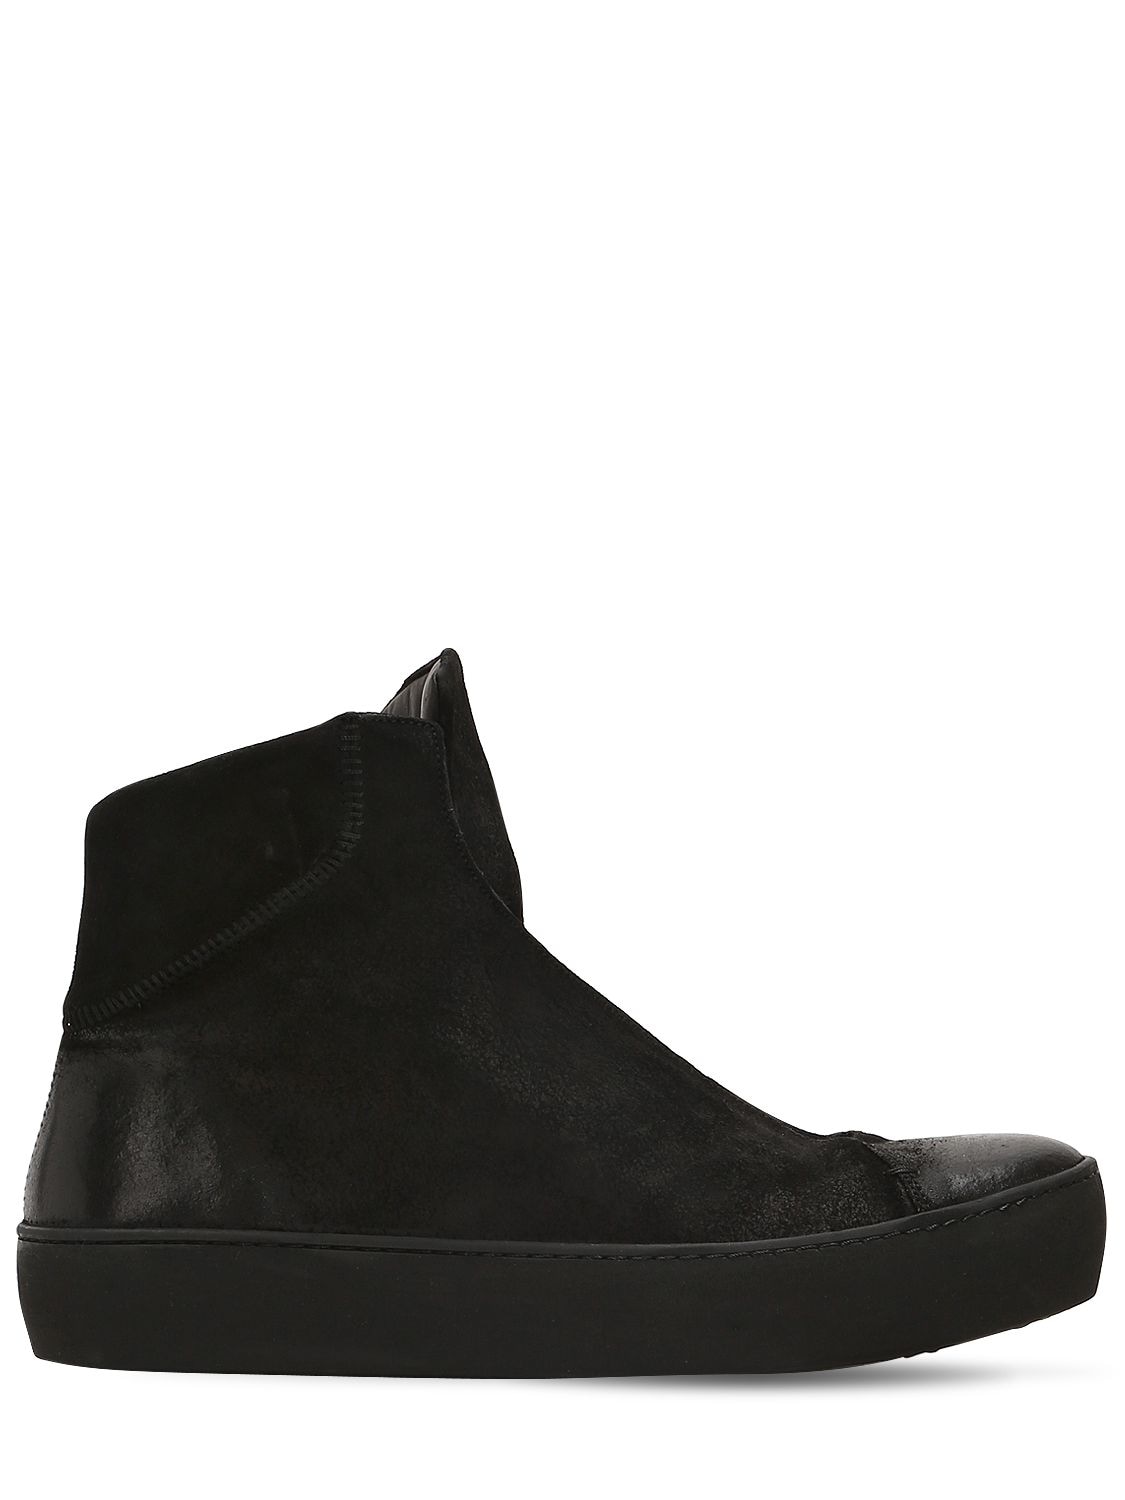 The Last Conspiracy Waxed Suede Slip-on High Top Sneakers In Black